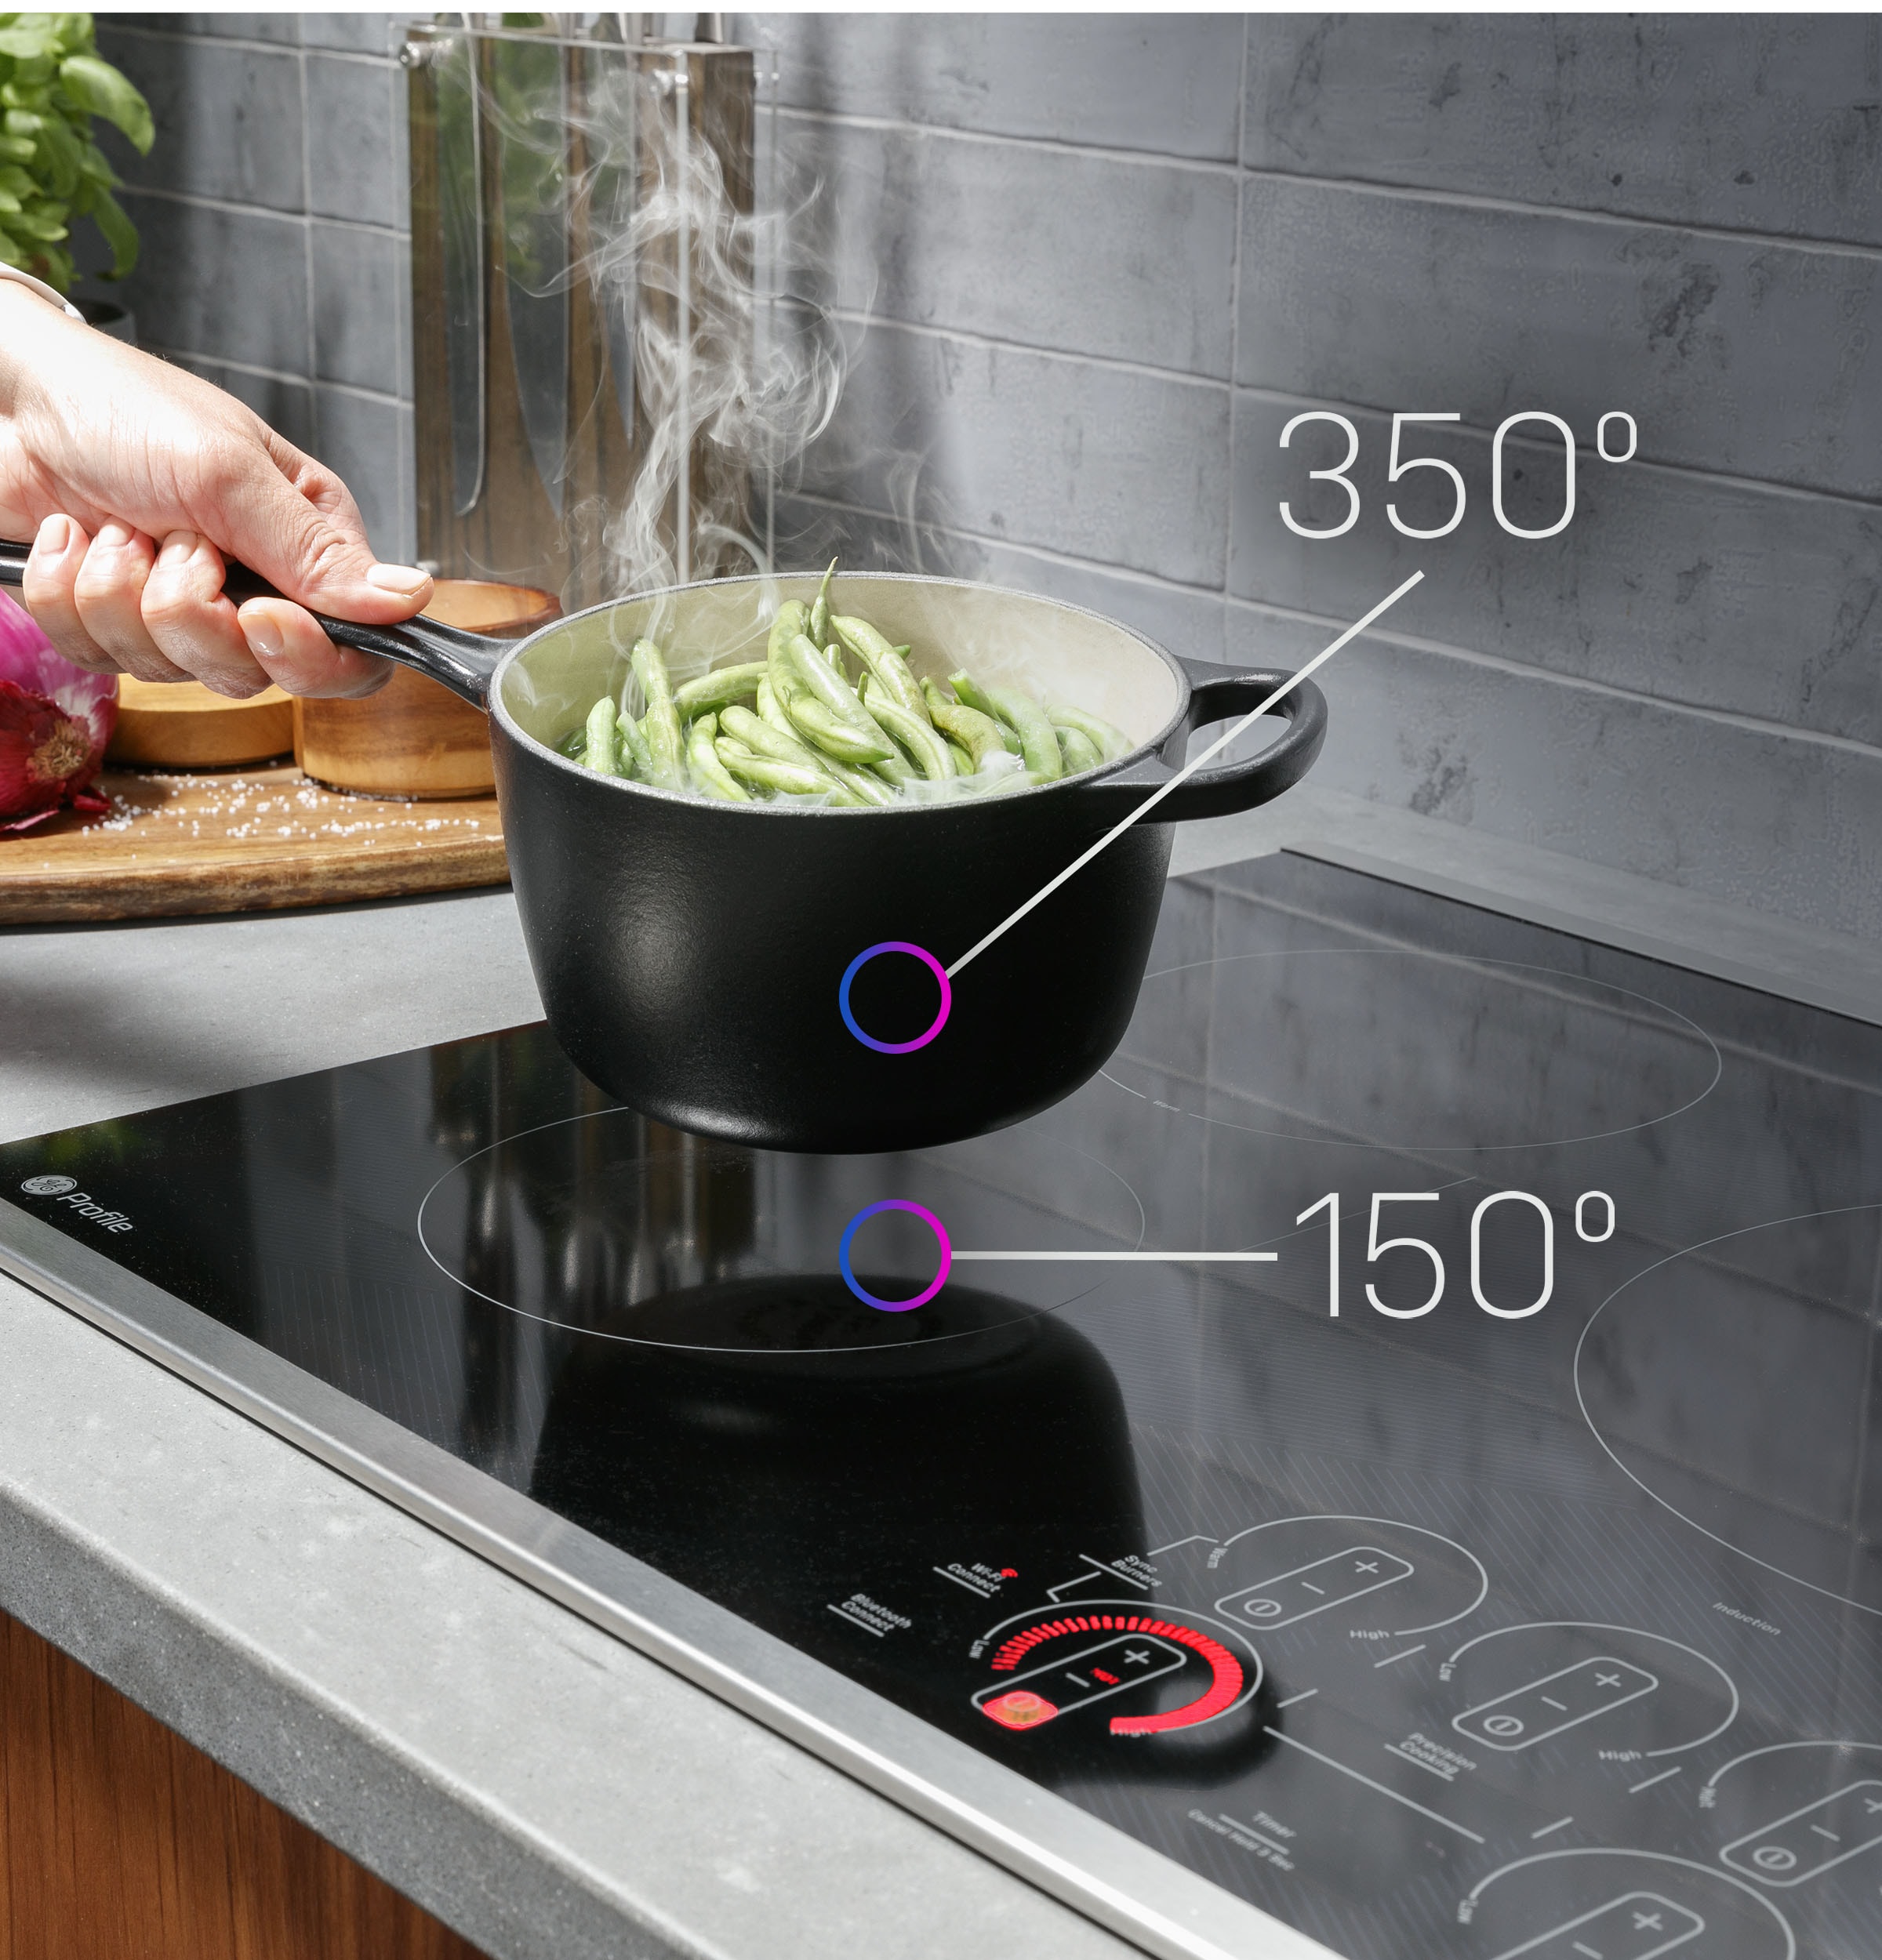 7 Portable Induction Cooktops with Stainless Steel Pot or Frying